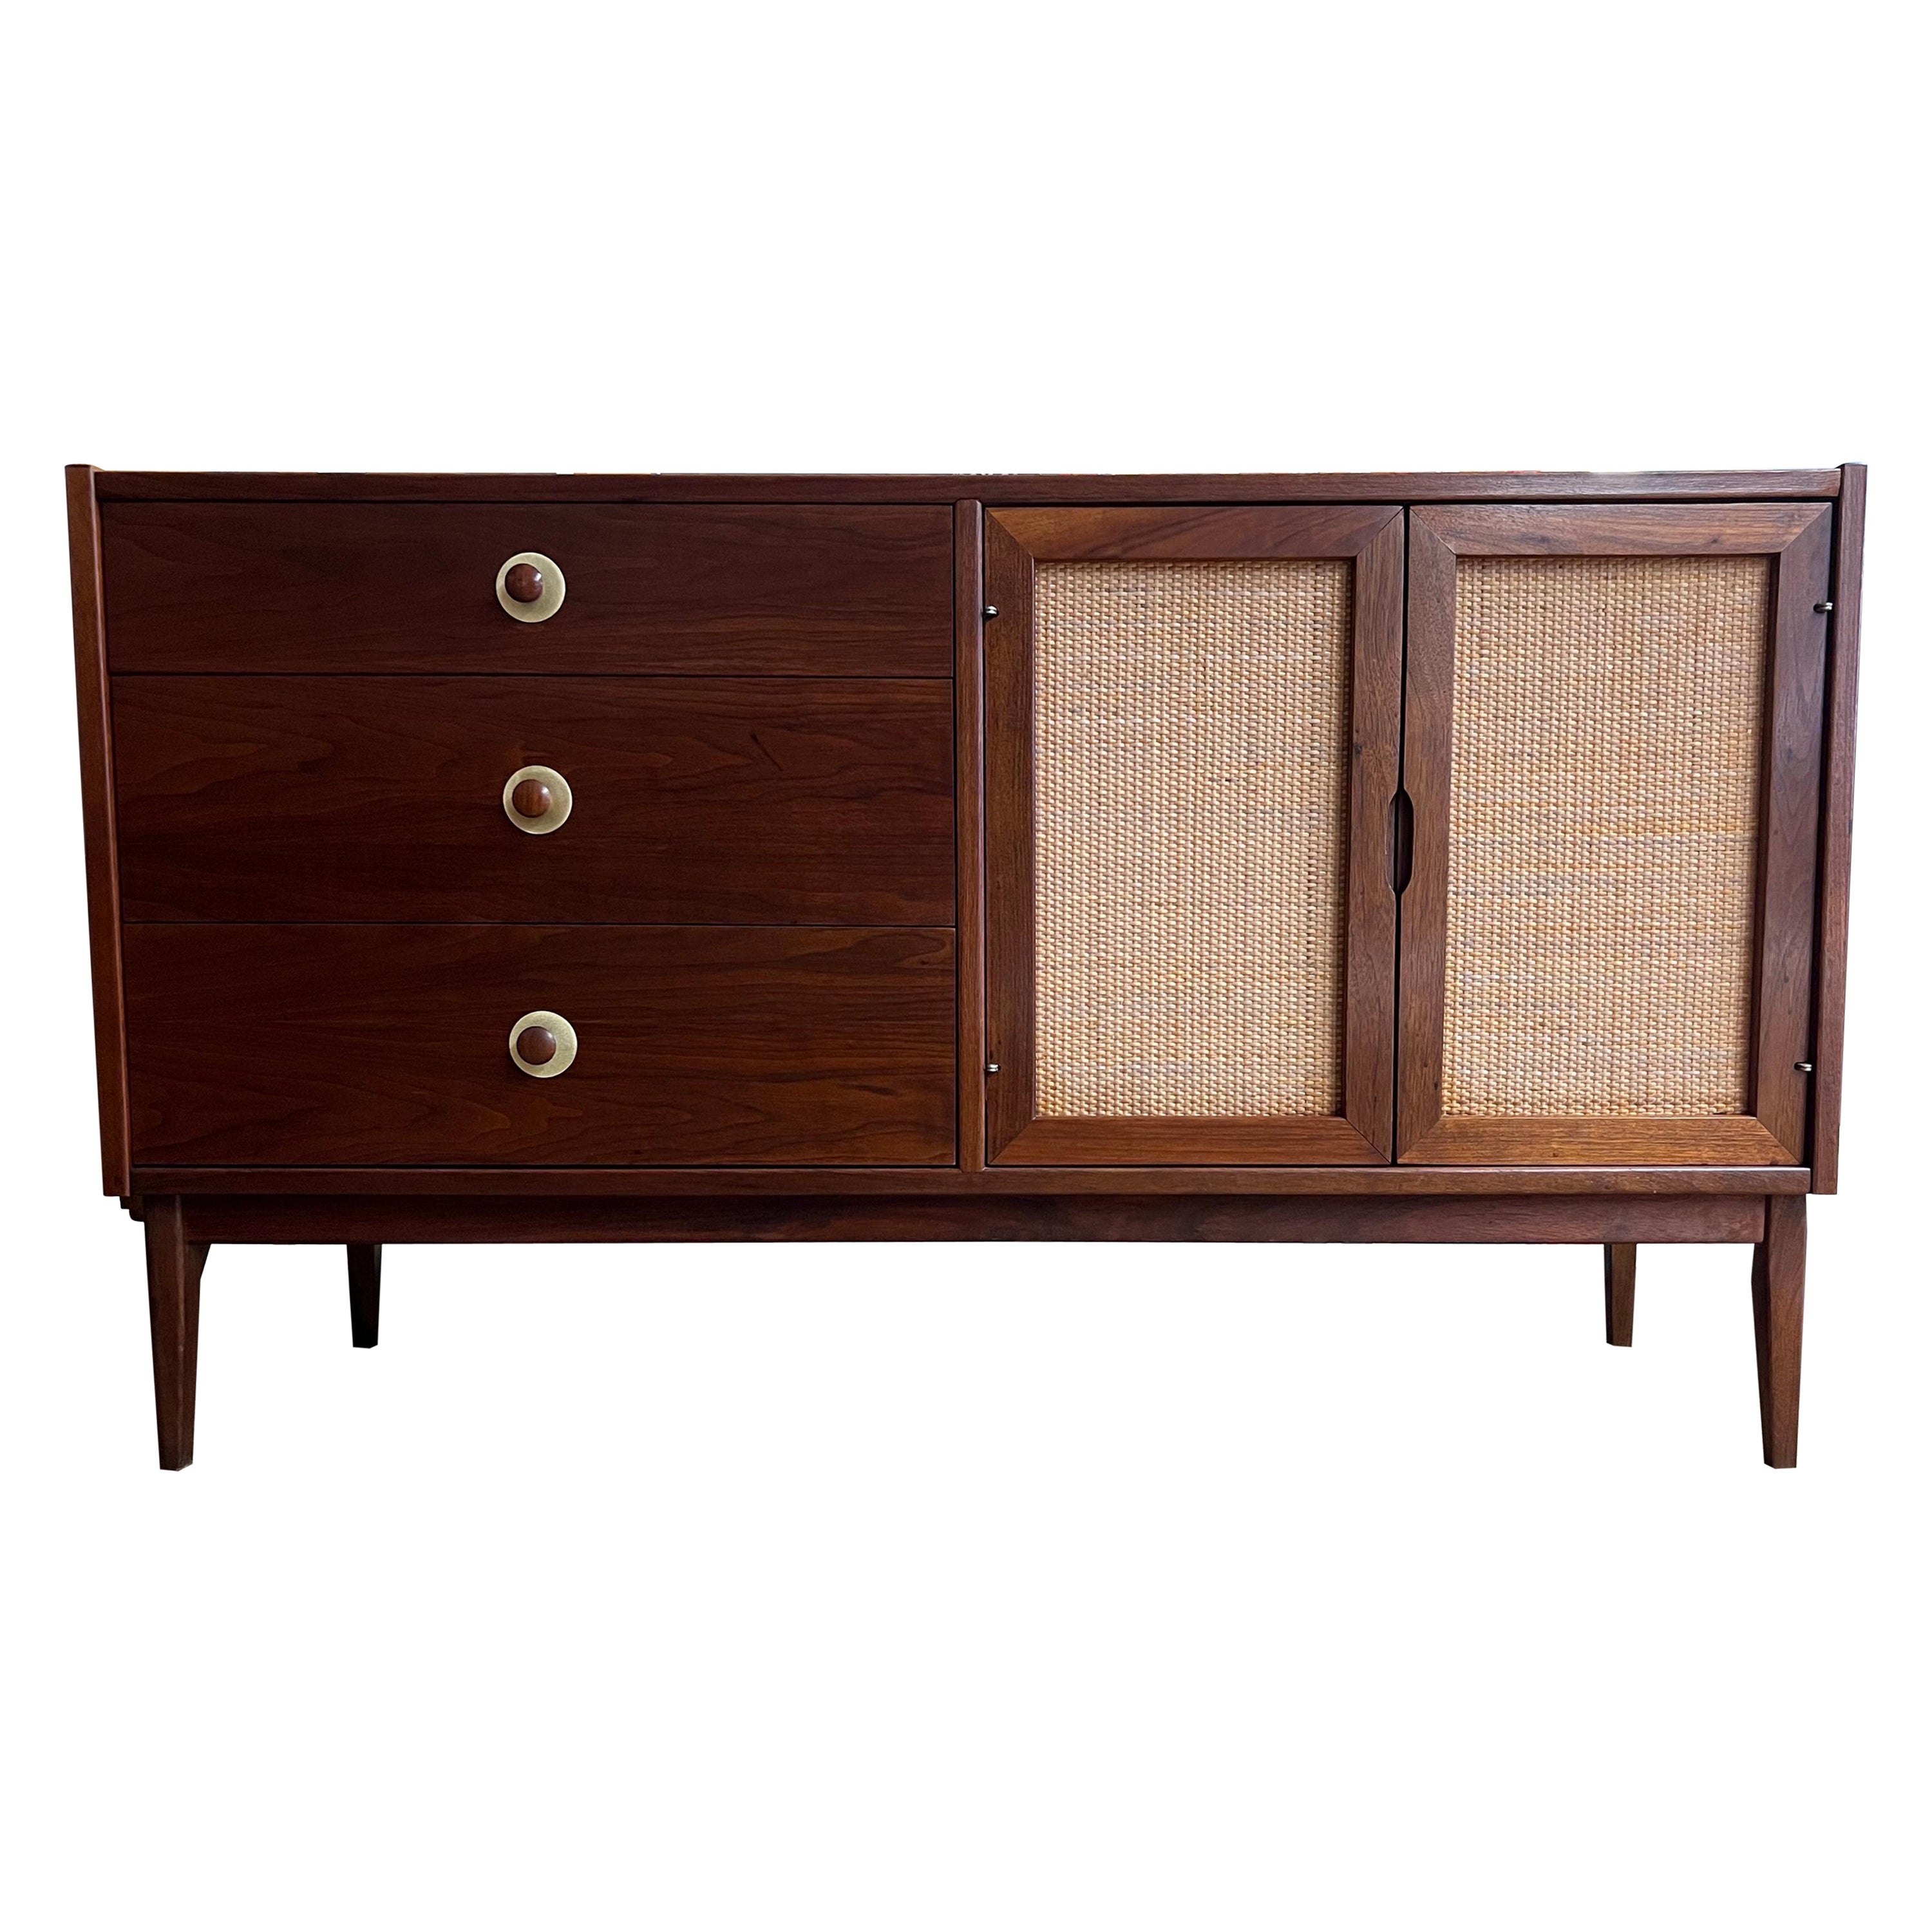 Vintage Mid Century Credenza or Buffet with Caning and Dovetailed Drawers For Sale